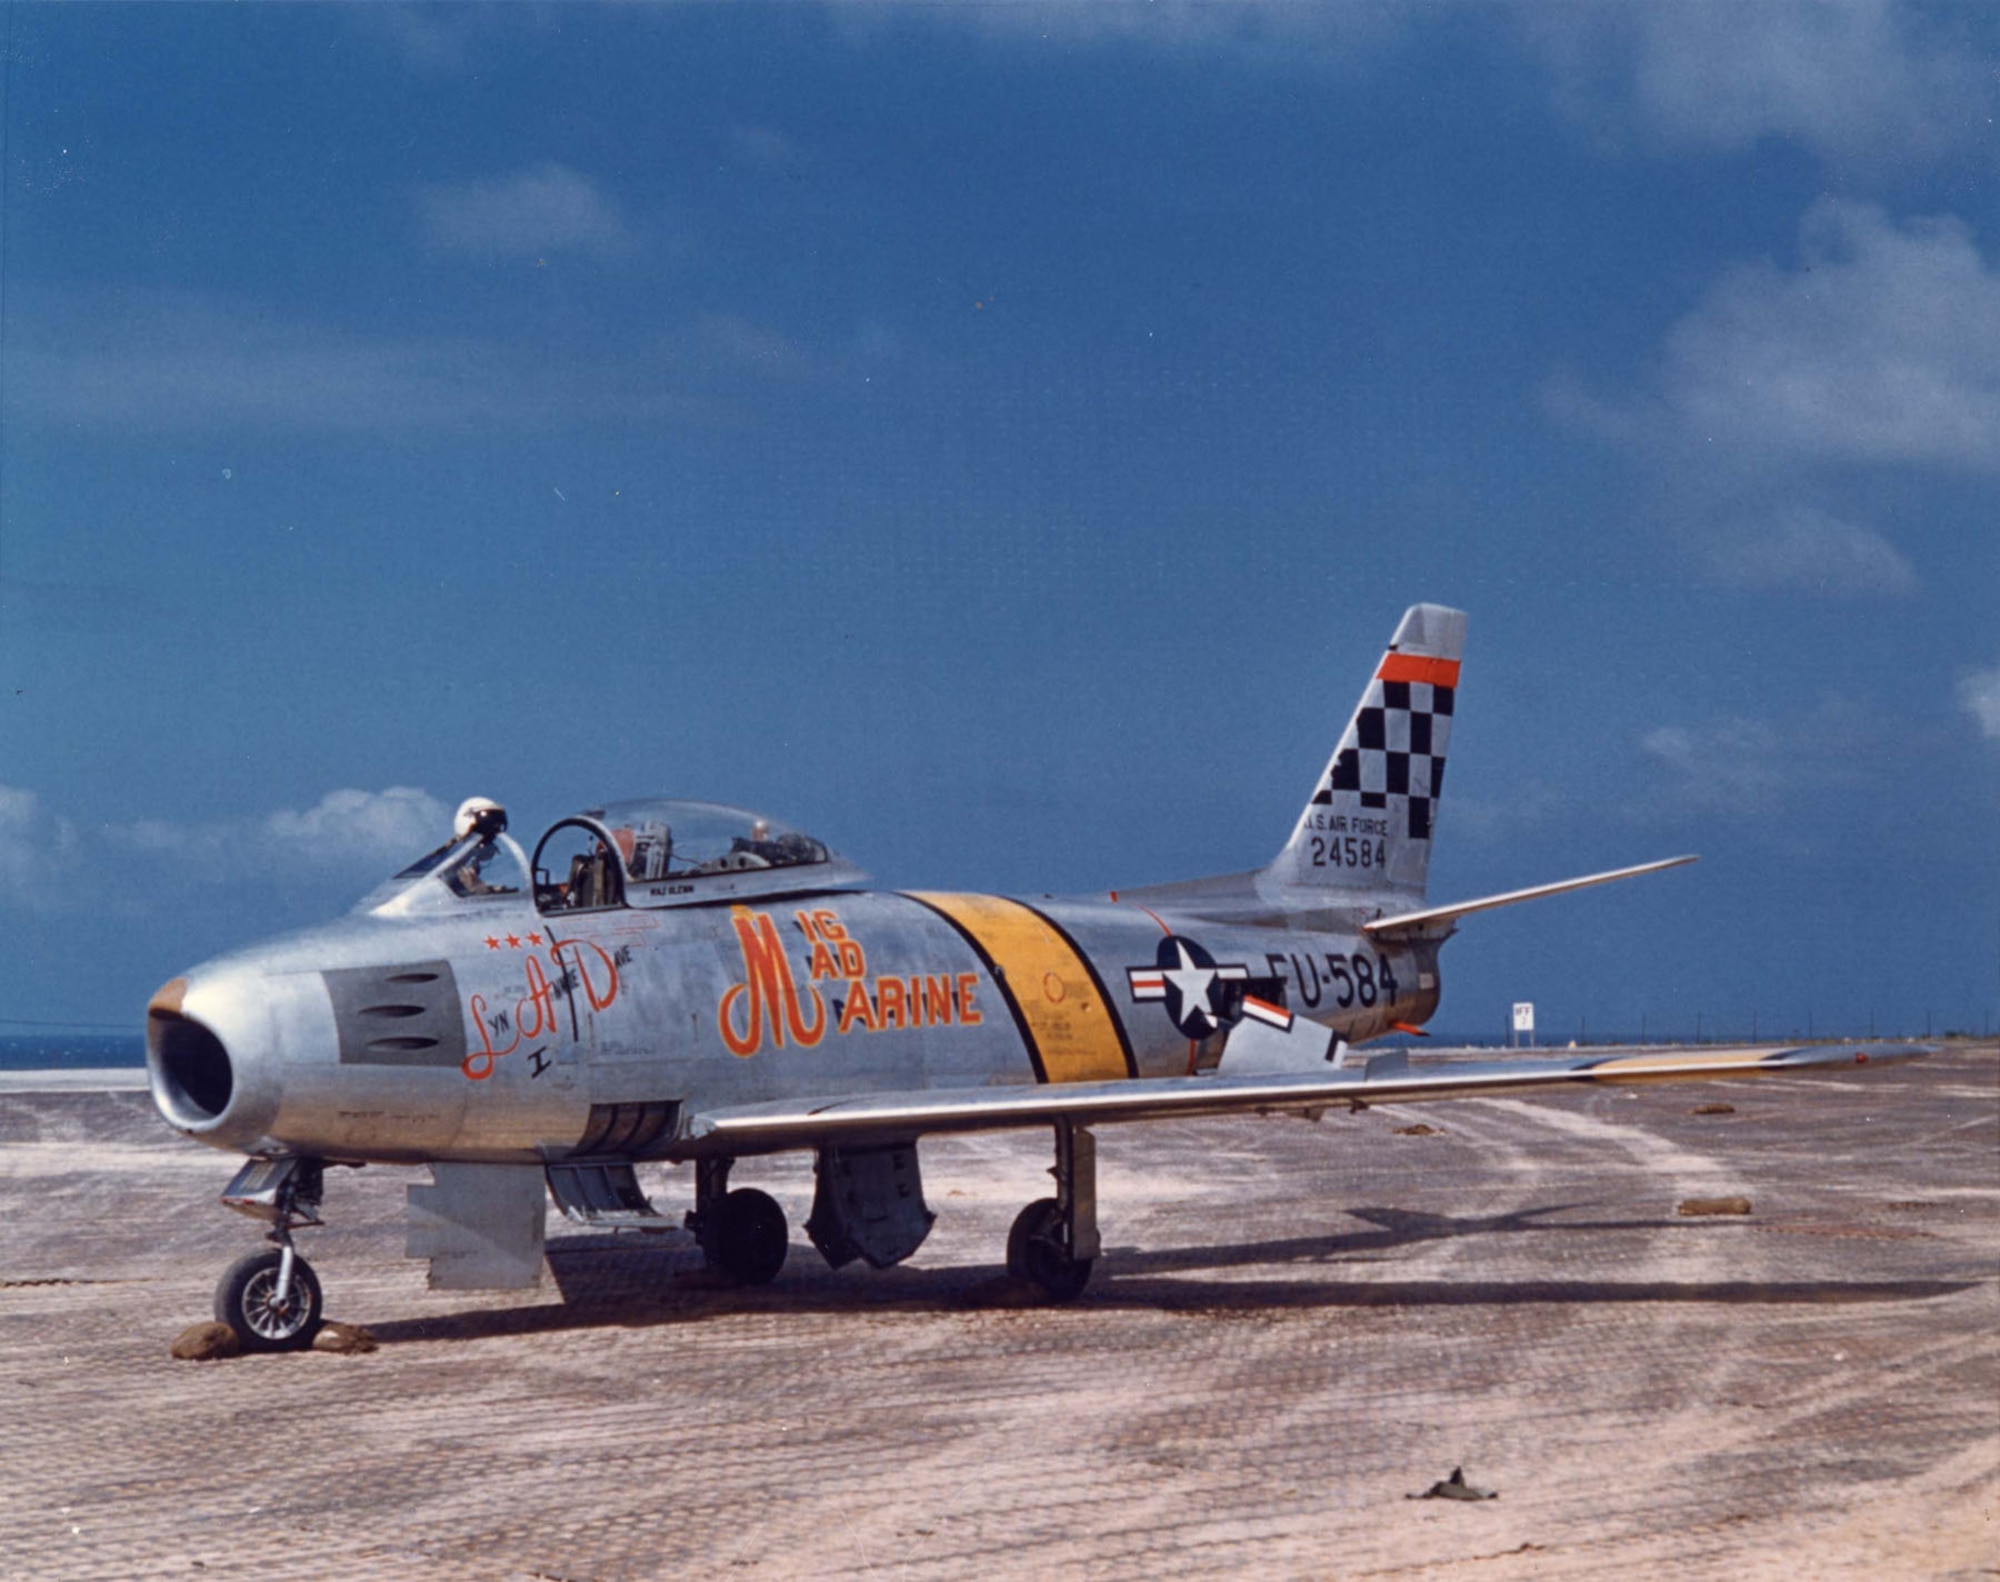 John Glenn's aircraft of the USAF's 51st Fighter Wing in Korea. There were three stars by the windscreen indicating the three MiG-15s he had shot down and "Lyn, Annie and Dave" was painted on the plane for his daughter, wife and son. (U.S. Air Force photo)